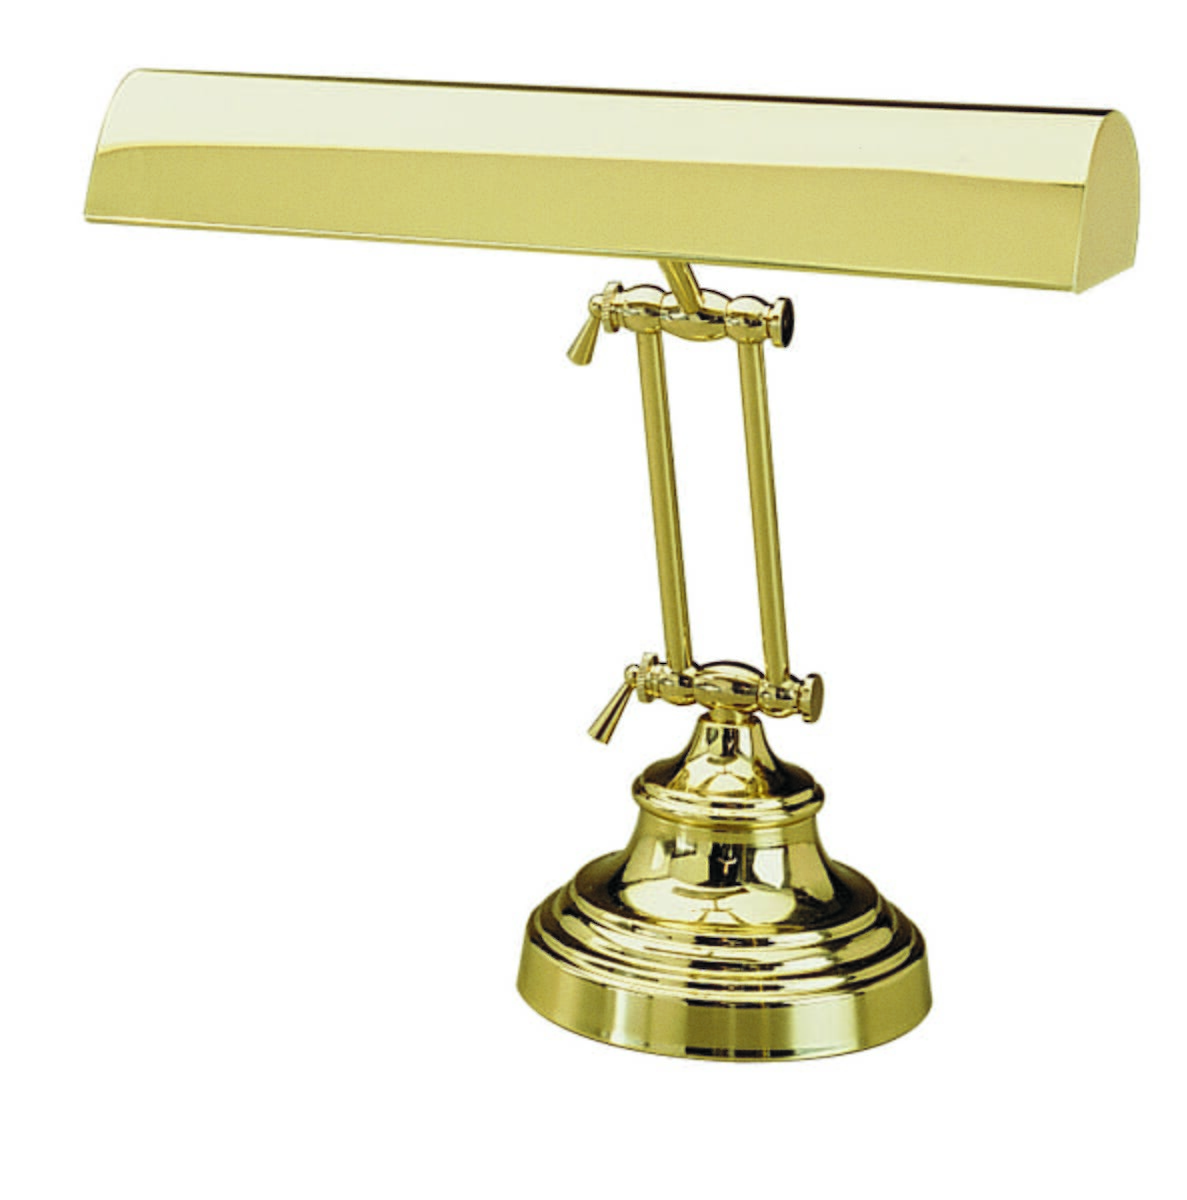 House of Troy 14"" Piano Desk Lamp in Polished Brass Finish -  P14-231-61